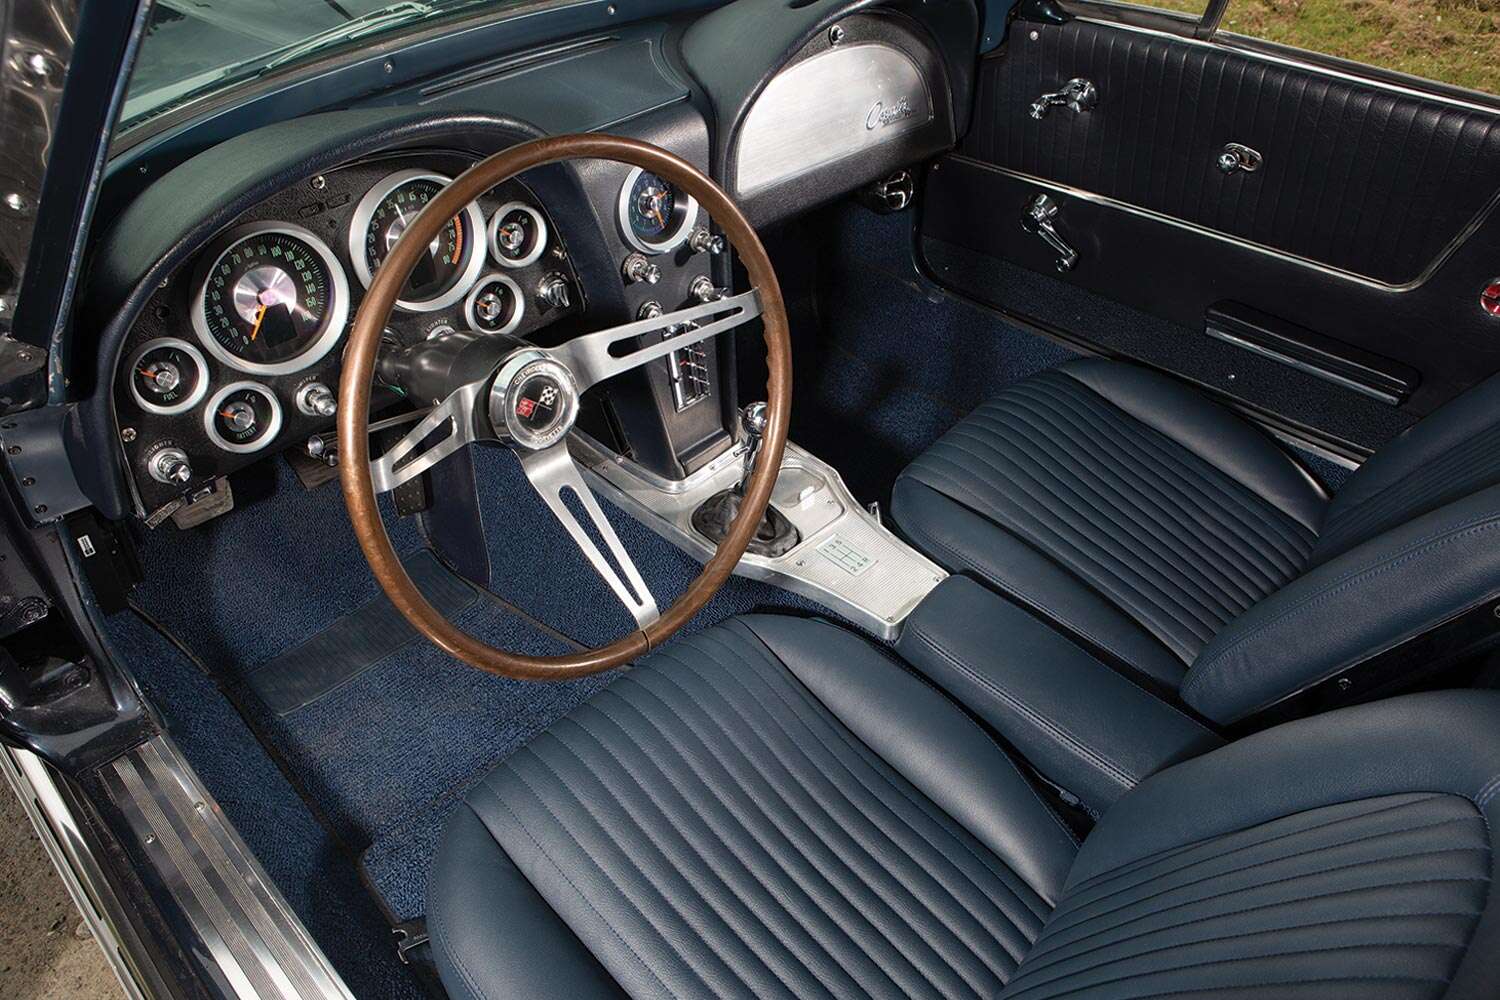 driver's side interior view of the '63 Corvette Sting Ray